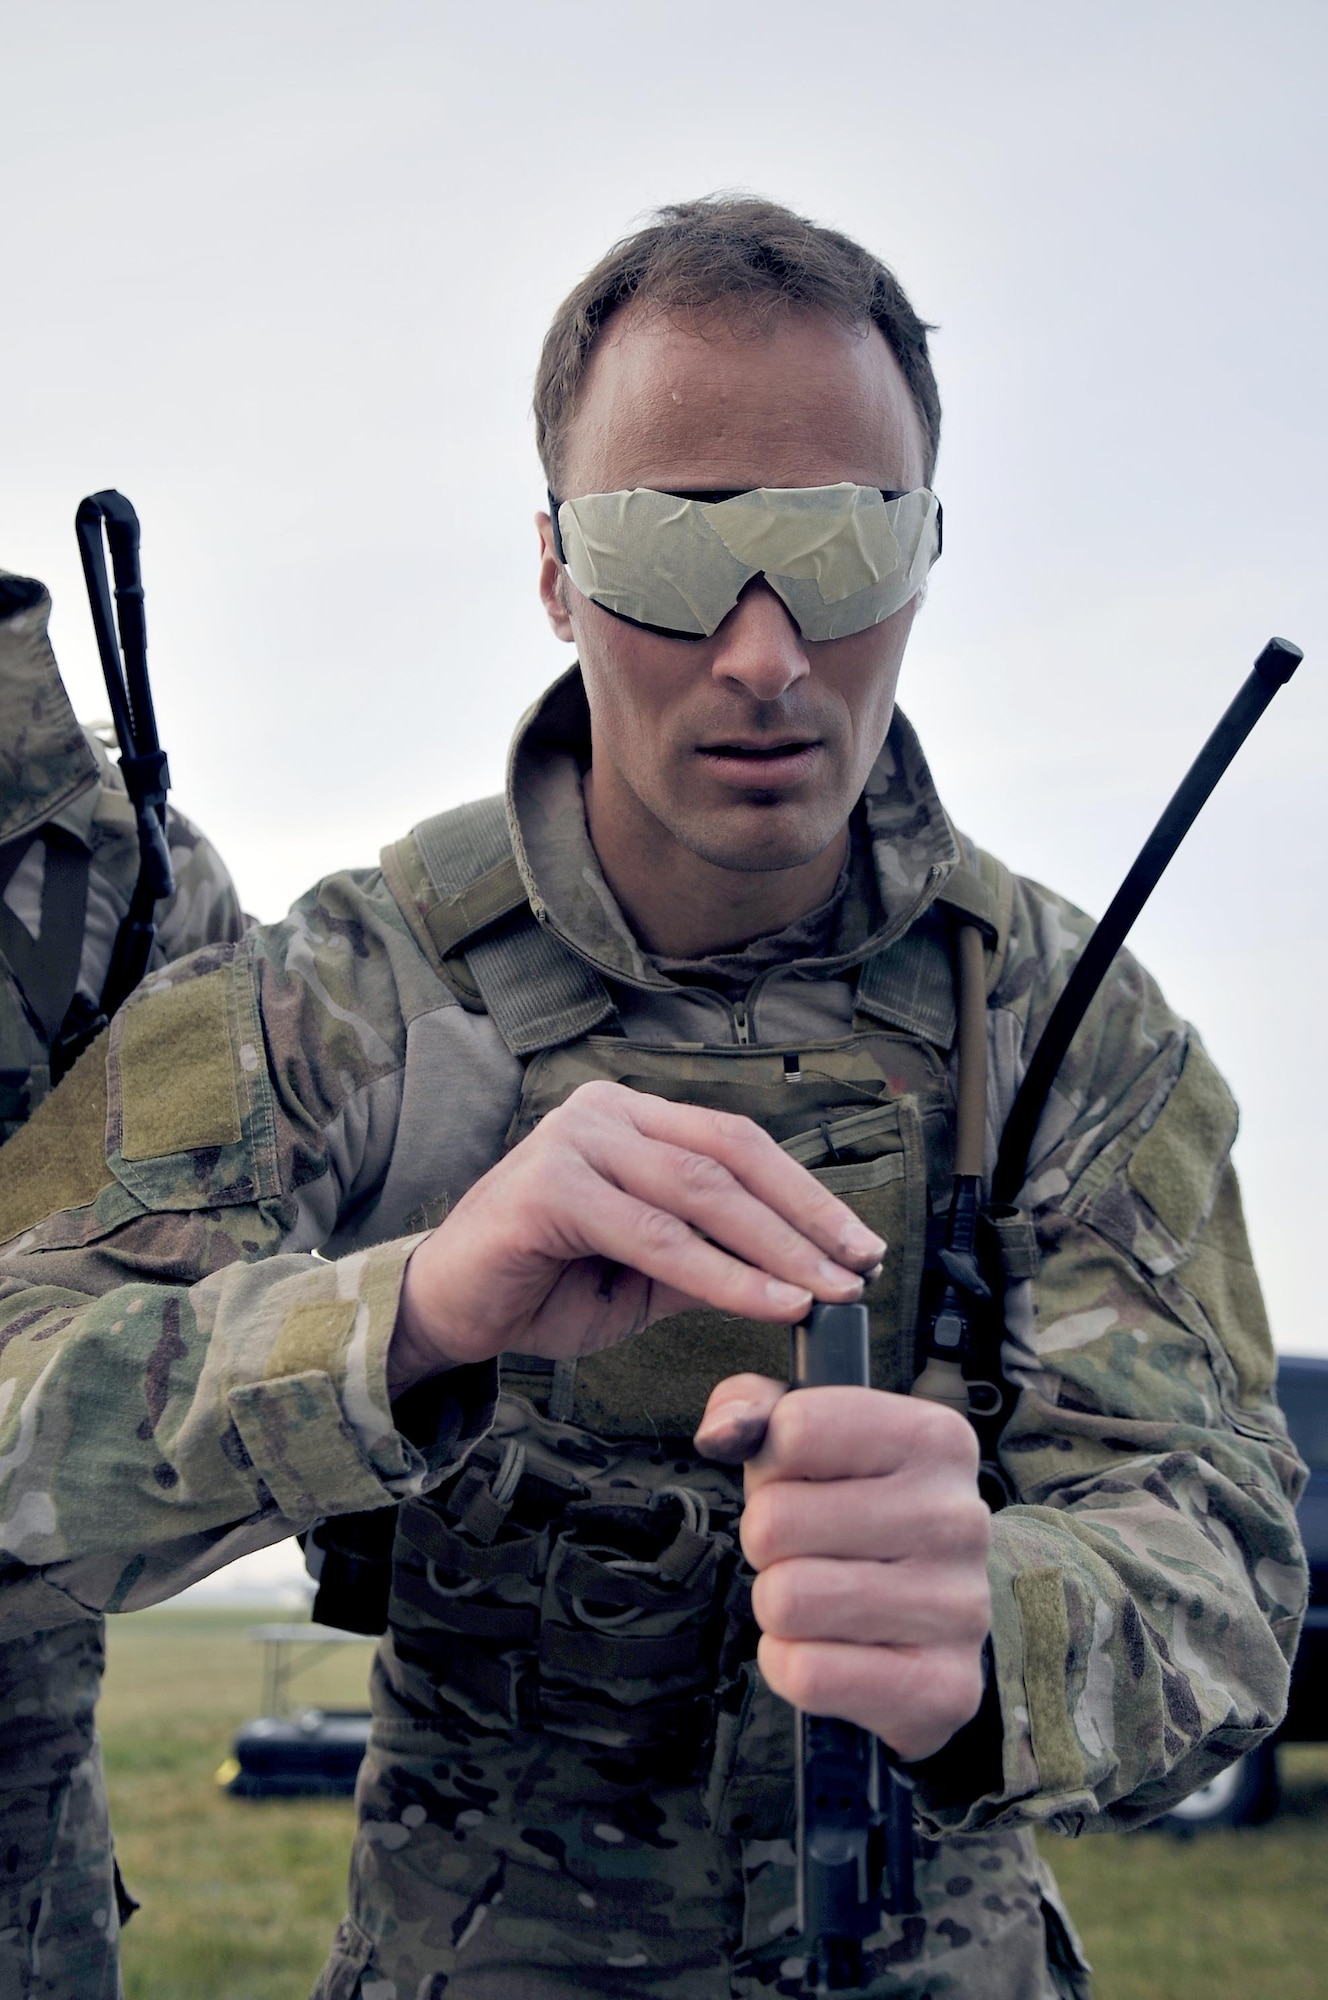 An Air Commando from the 321st Special Tactics Squadron participates in a blind weapons assembly challenge during the Monster Mash April 10, 2015 on RAF Mildenhall, England. A Monster Mash is a long-standing special tactics tradition which combines event designed to test strength, stamina and teamwork skills. (U.S. Air Force photo by Airman 1st Class Kyla Gifford)